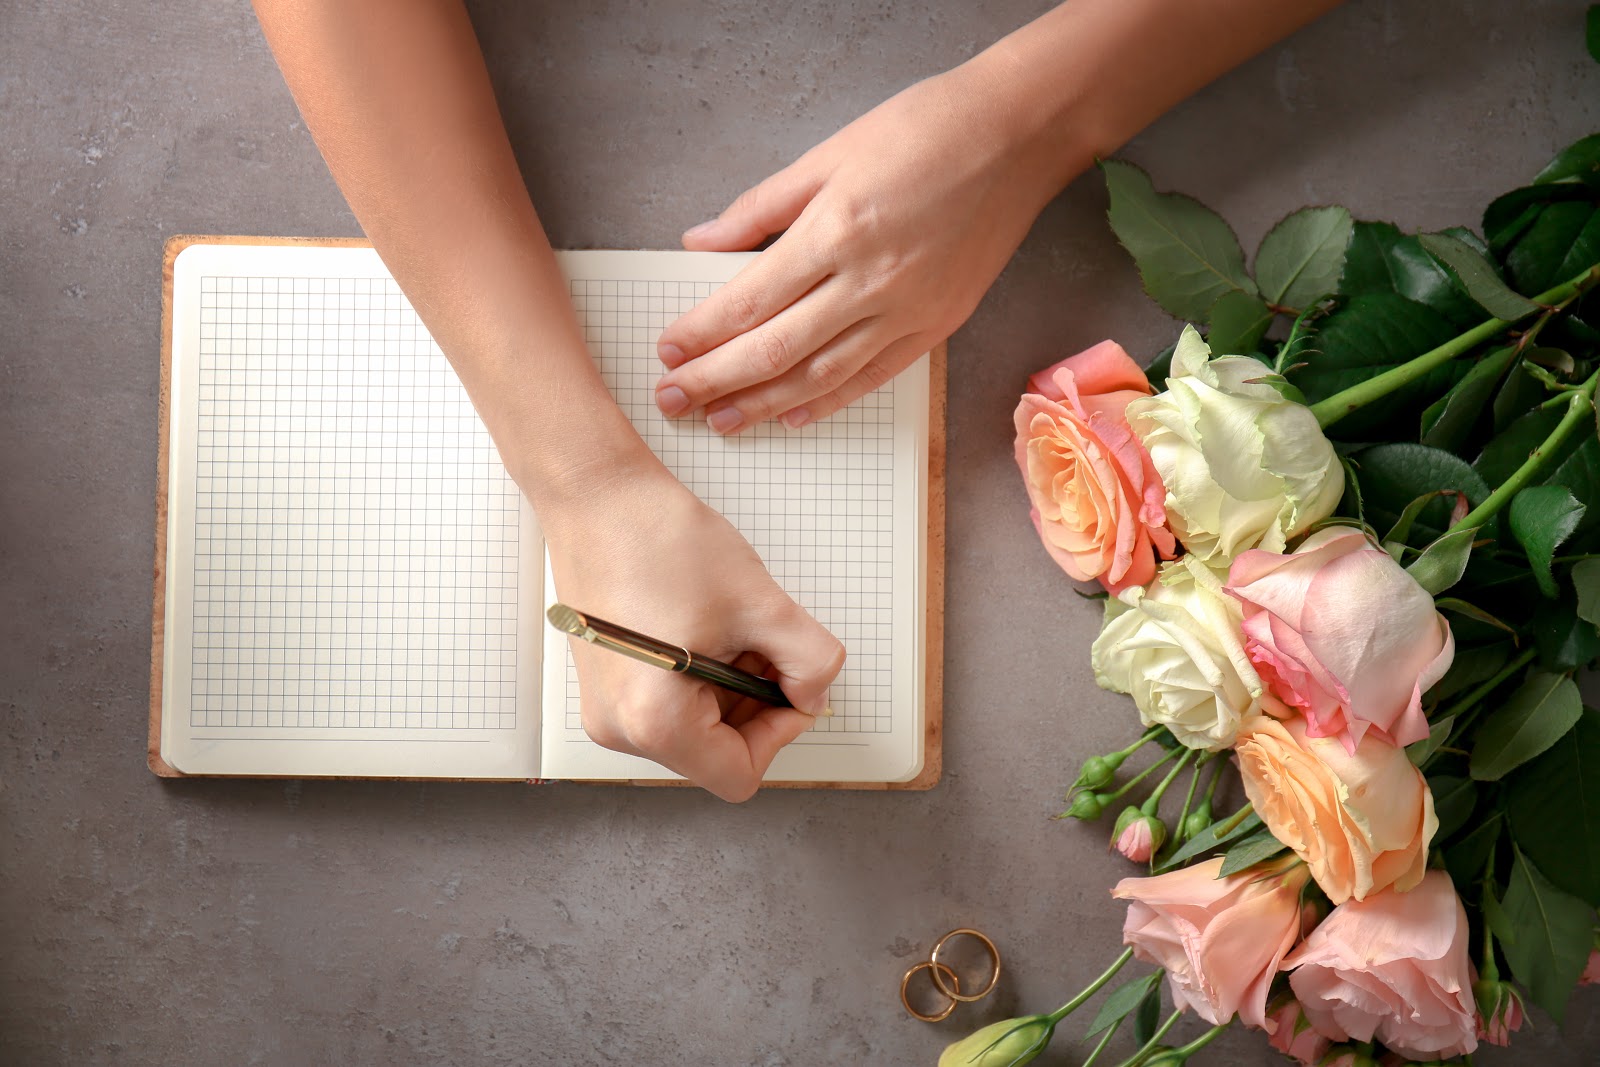 Wedding wishes: Roses and wedding rings next to hands that write notes in a notebook